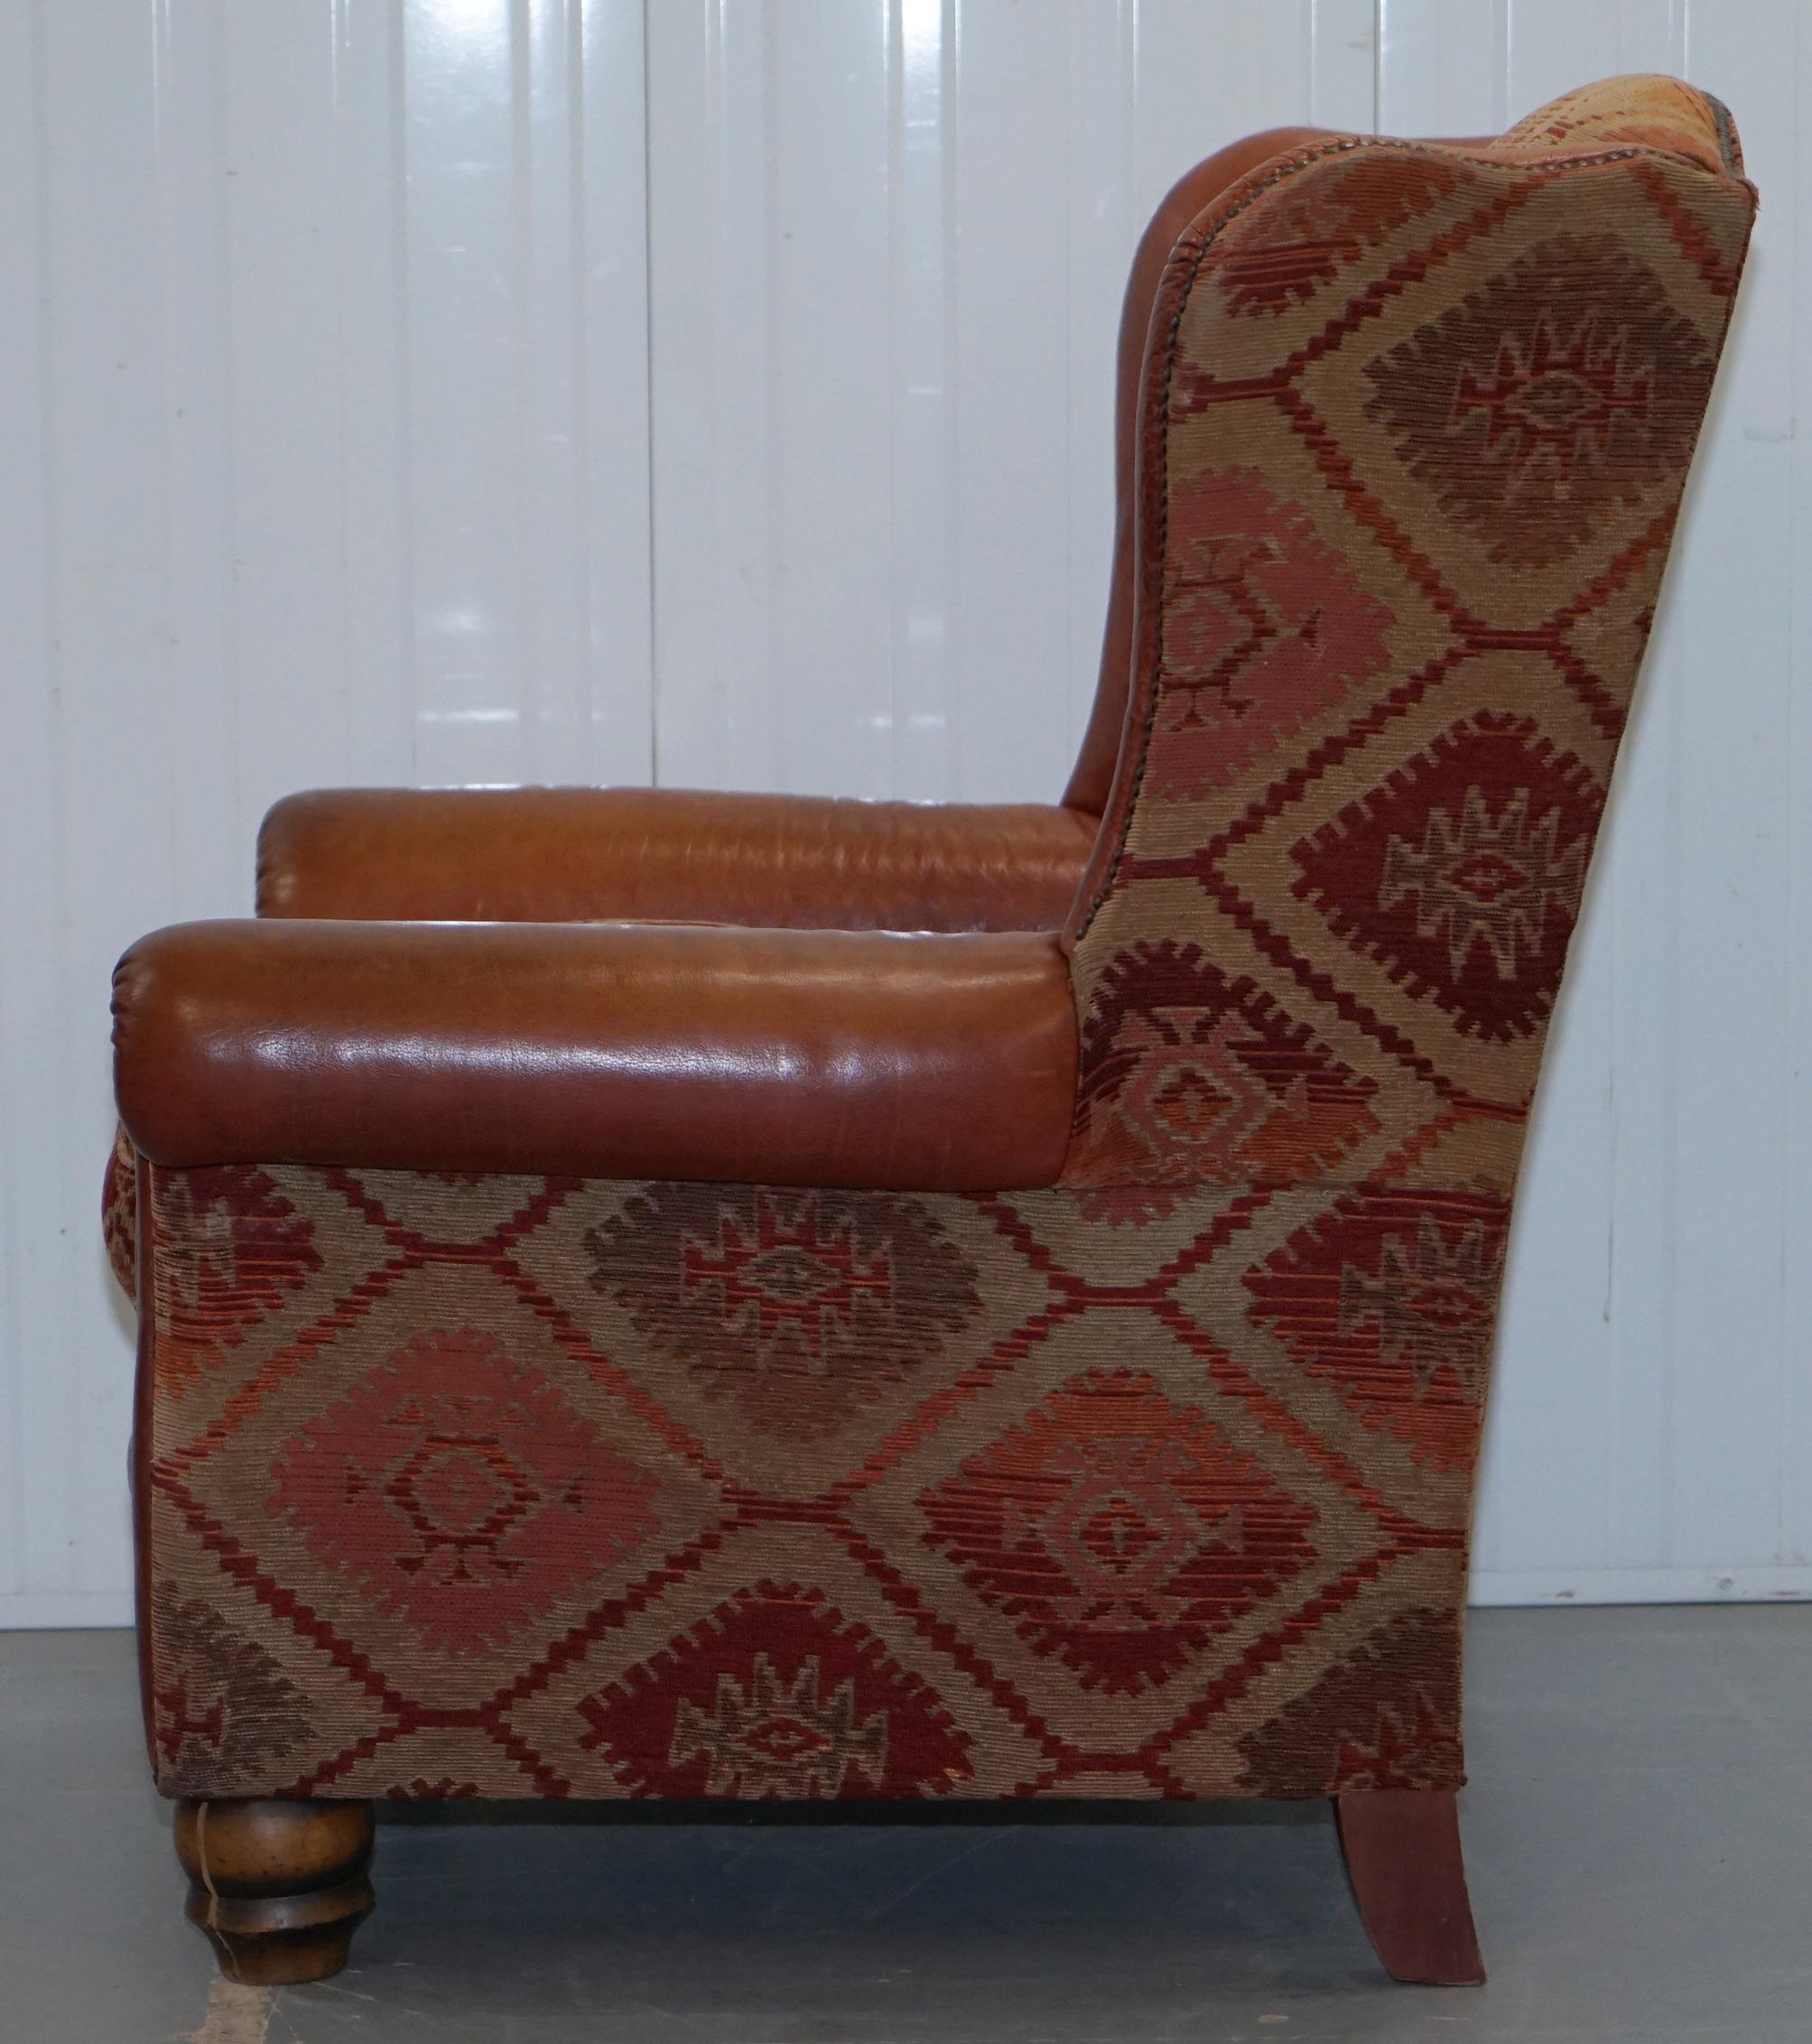 Tetrad Eastwood Brown Leather and Kilim Upholstery Armchair Lovely 11